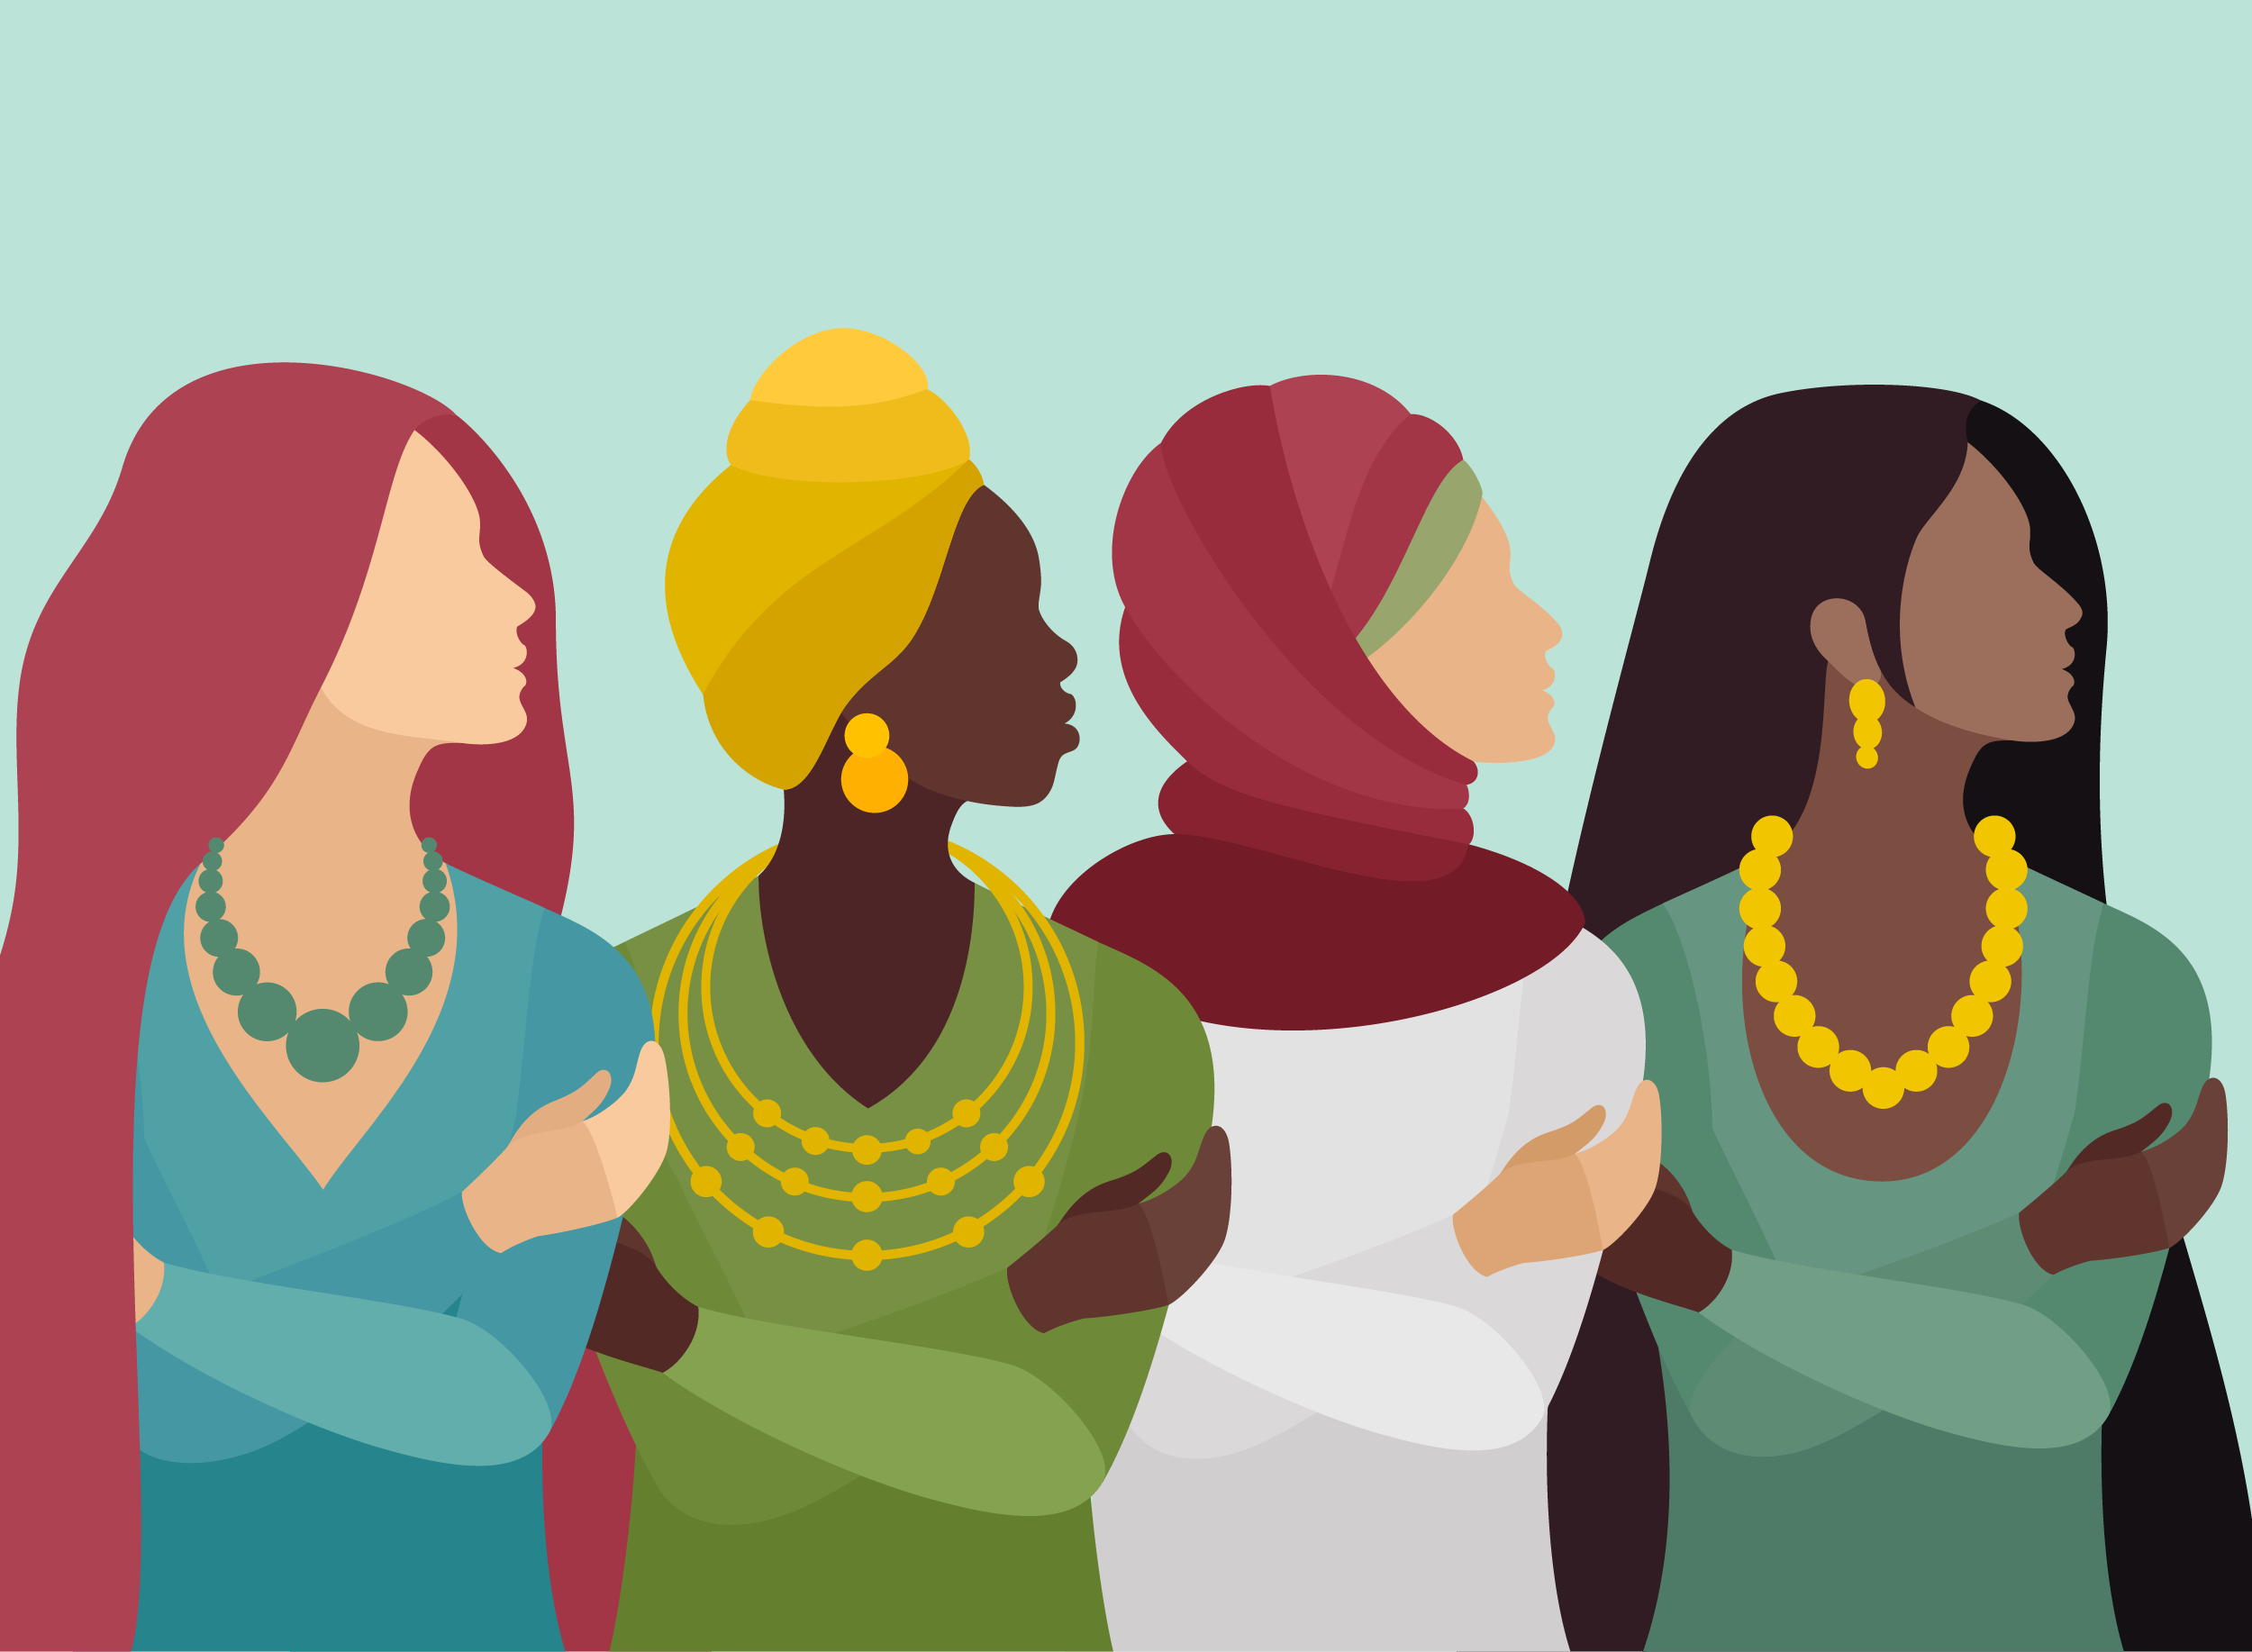 Illustration of multiracial women embracing themselves.